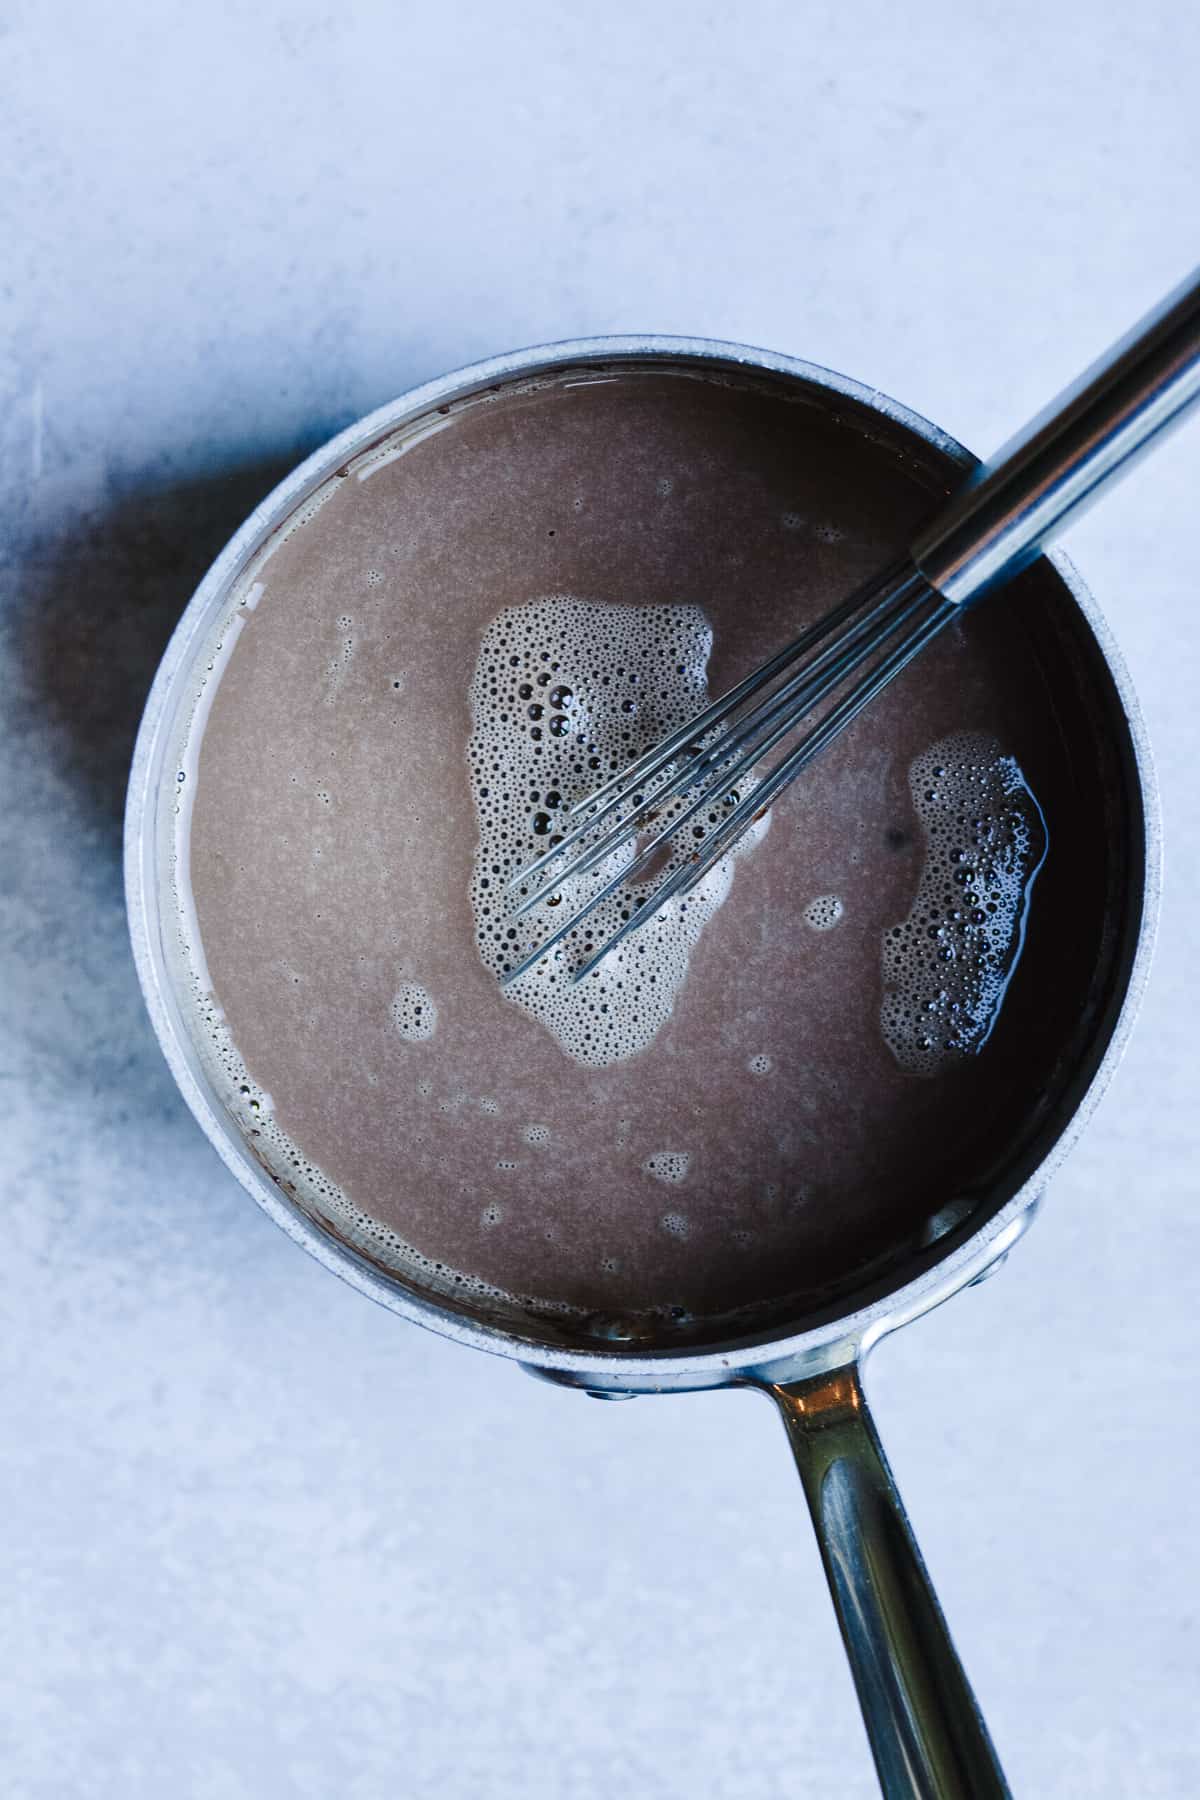 Hot chocolate ingredients in a small saucepan with a wire whisk.